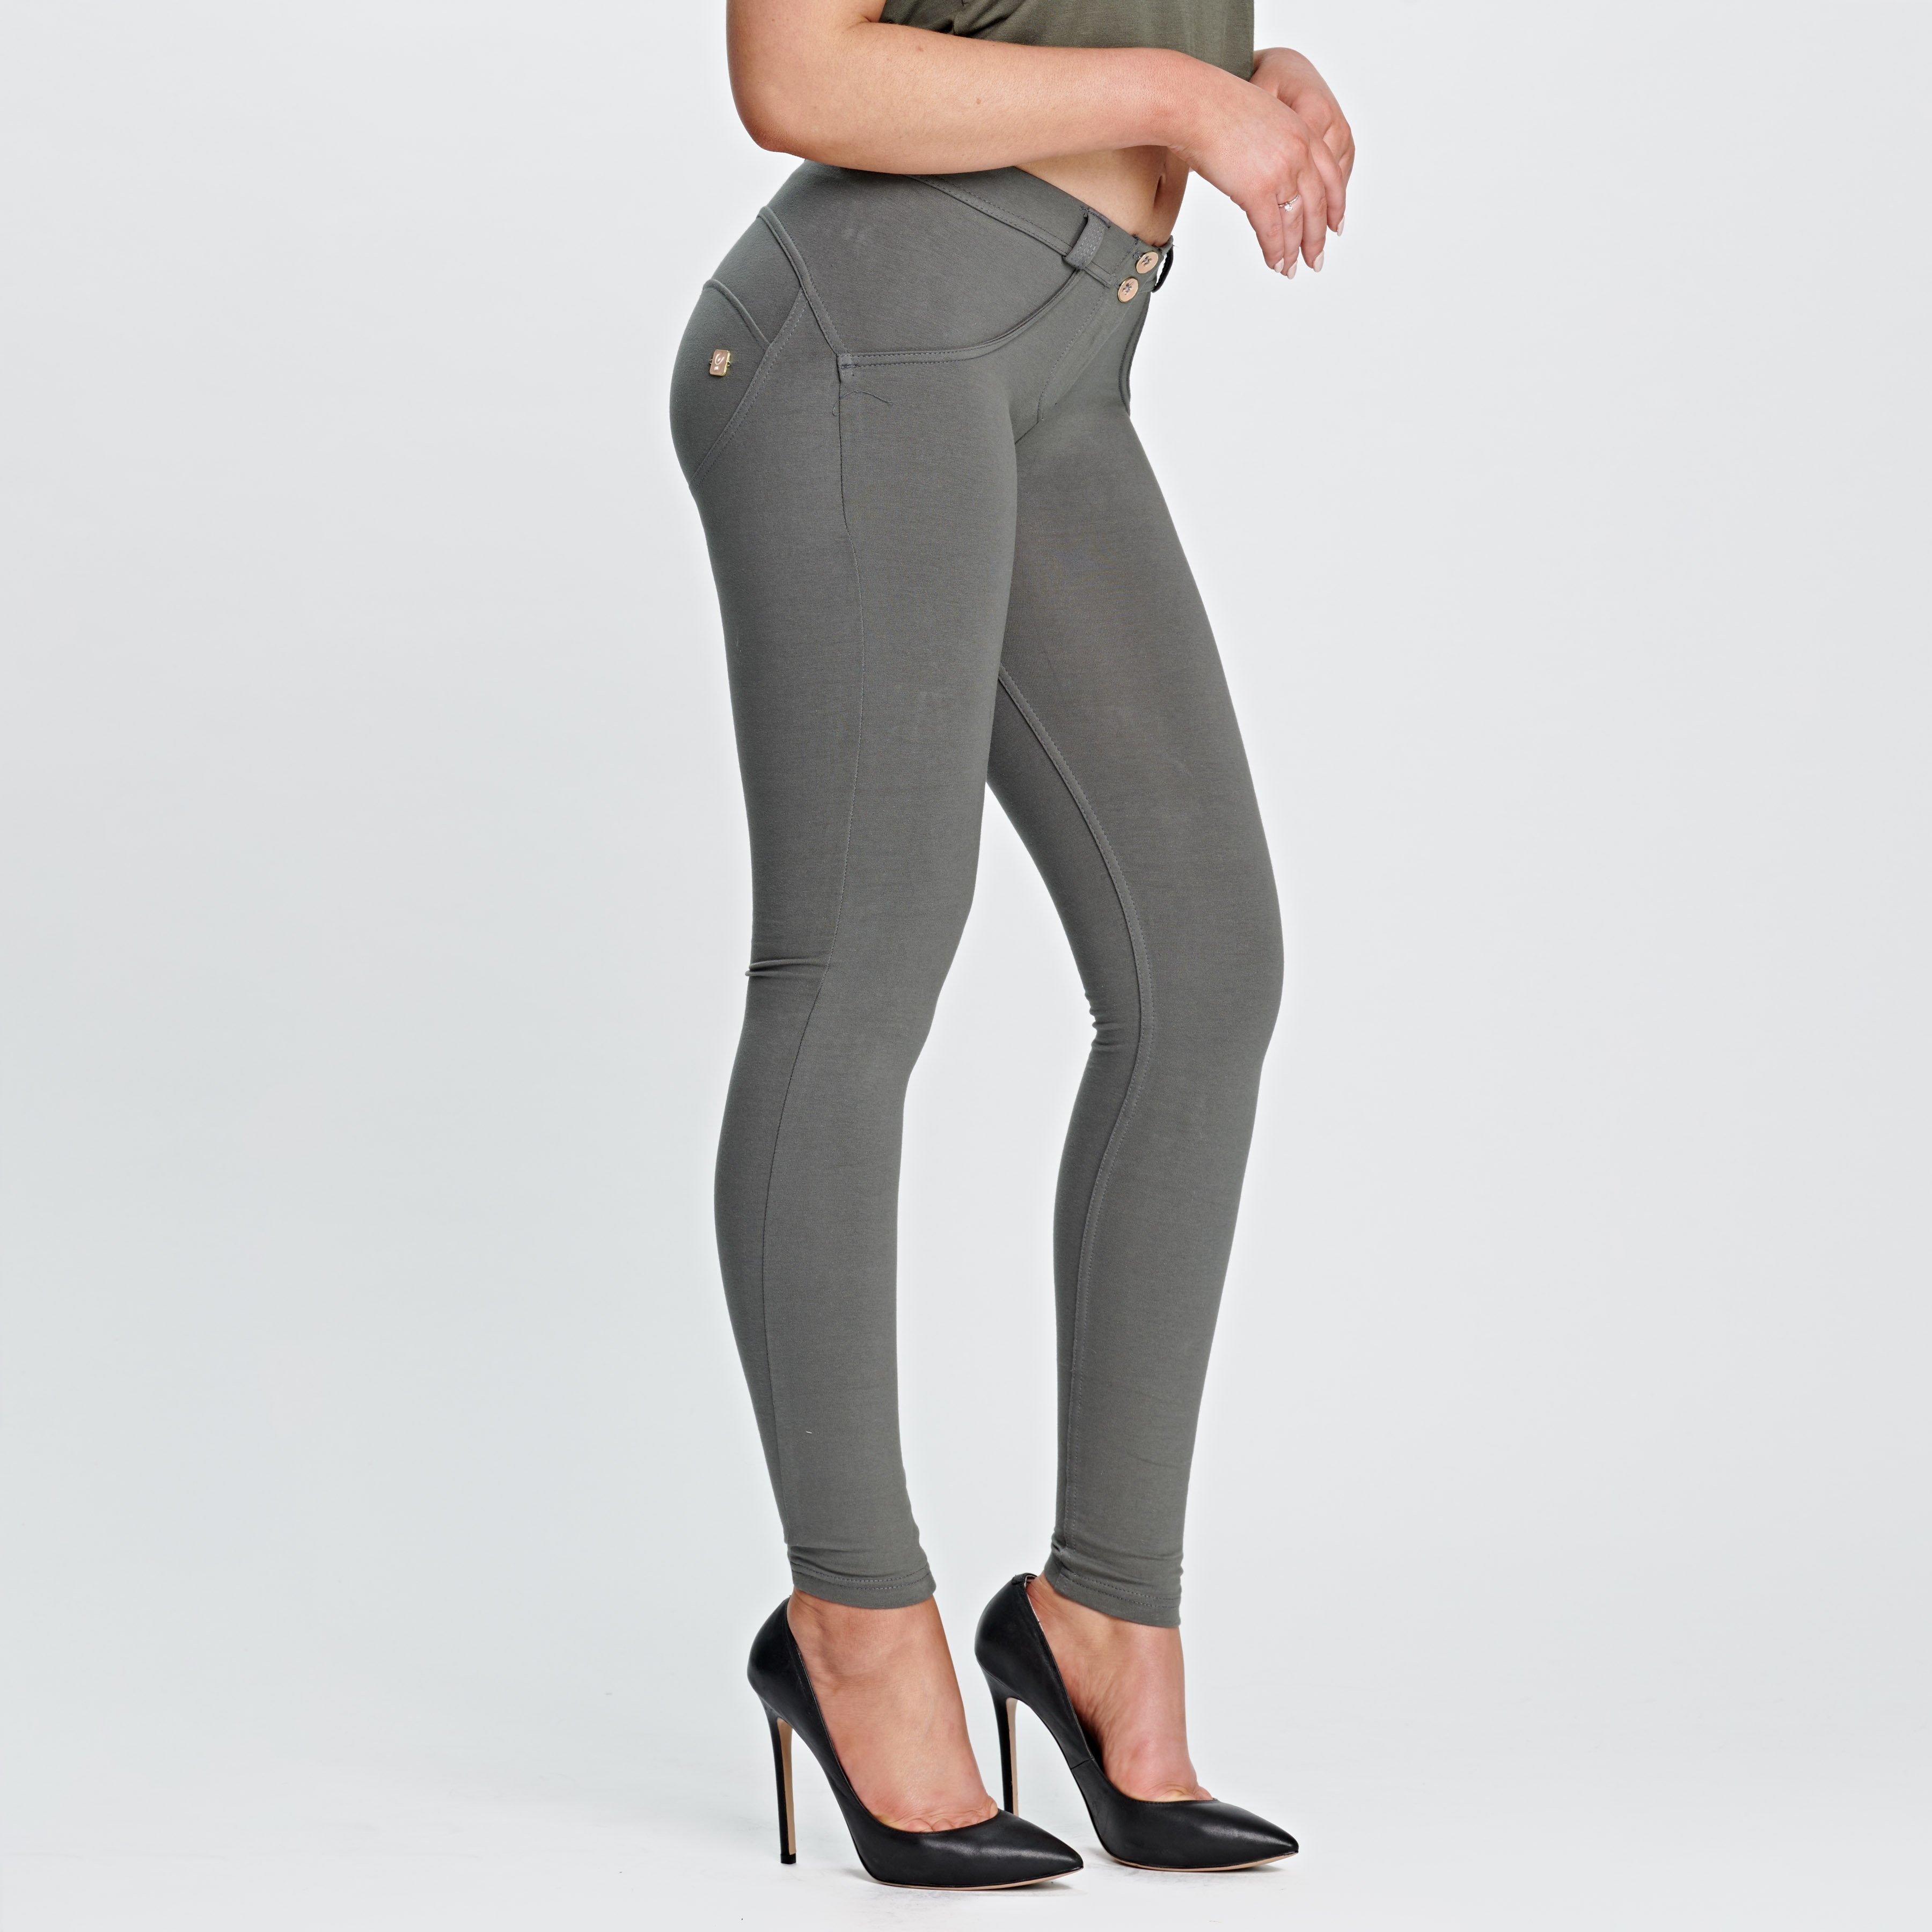 BossedSweat High Waisted Leggings Plus Butt Lifter – Bossed Up